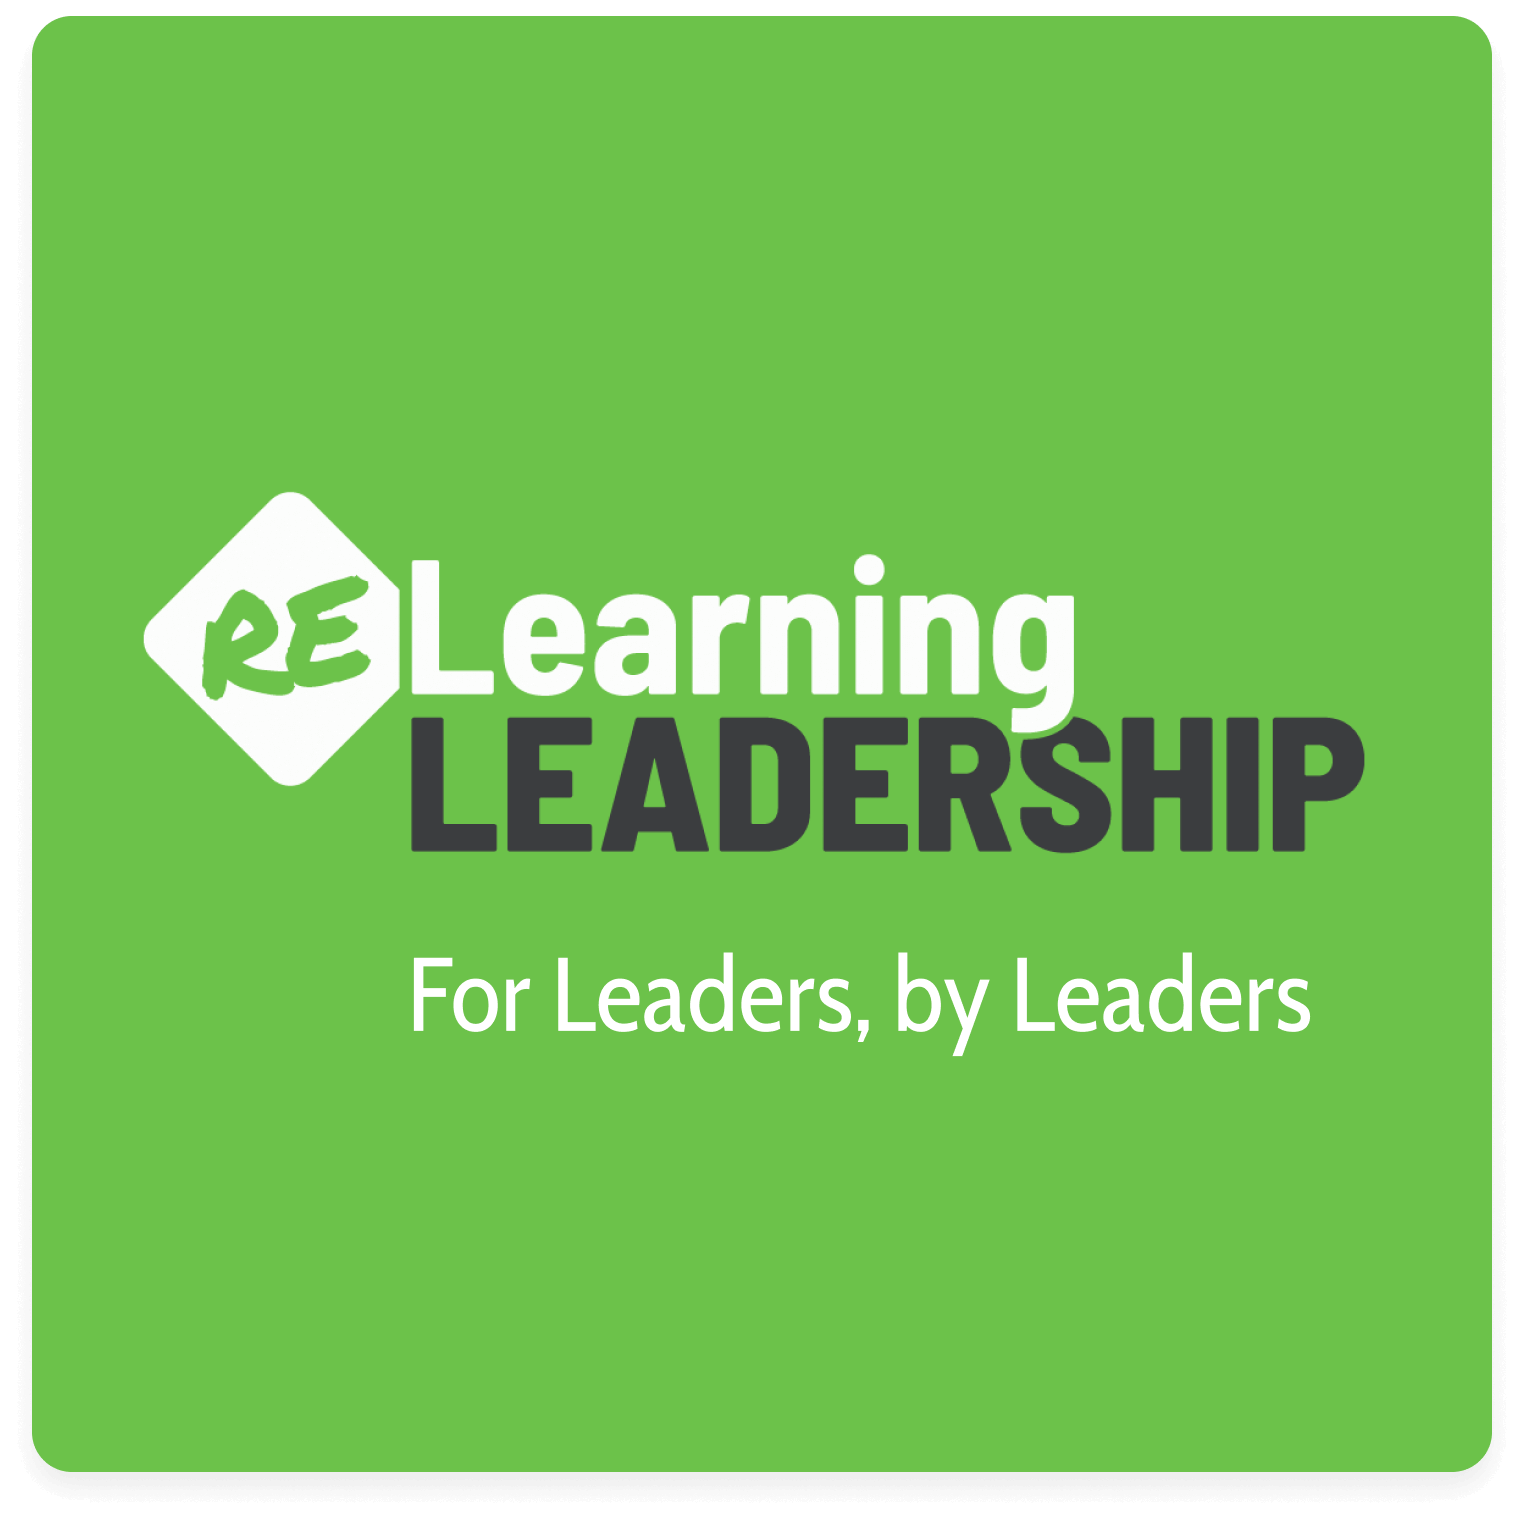 The logo for the relearning leadership  podcast and text that says for leaders by leaders is on a green background.